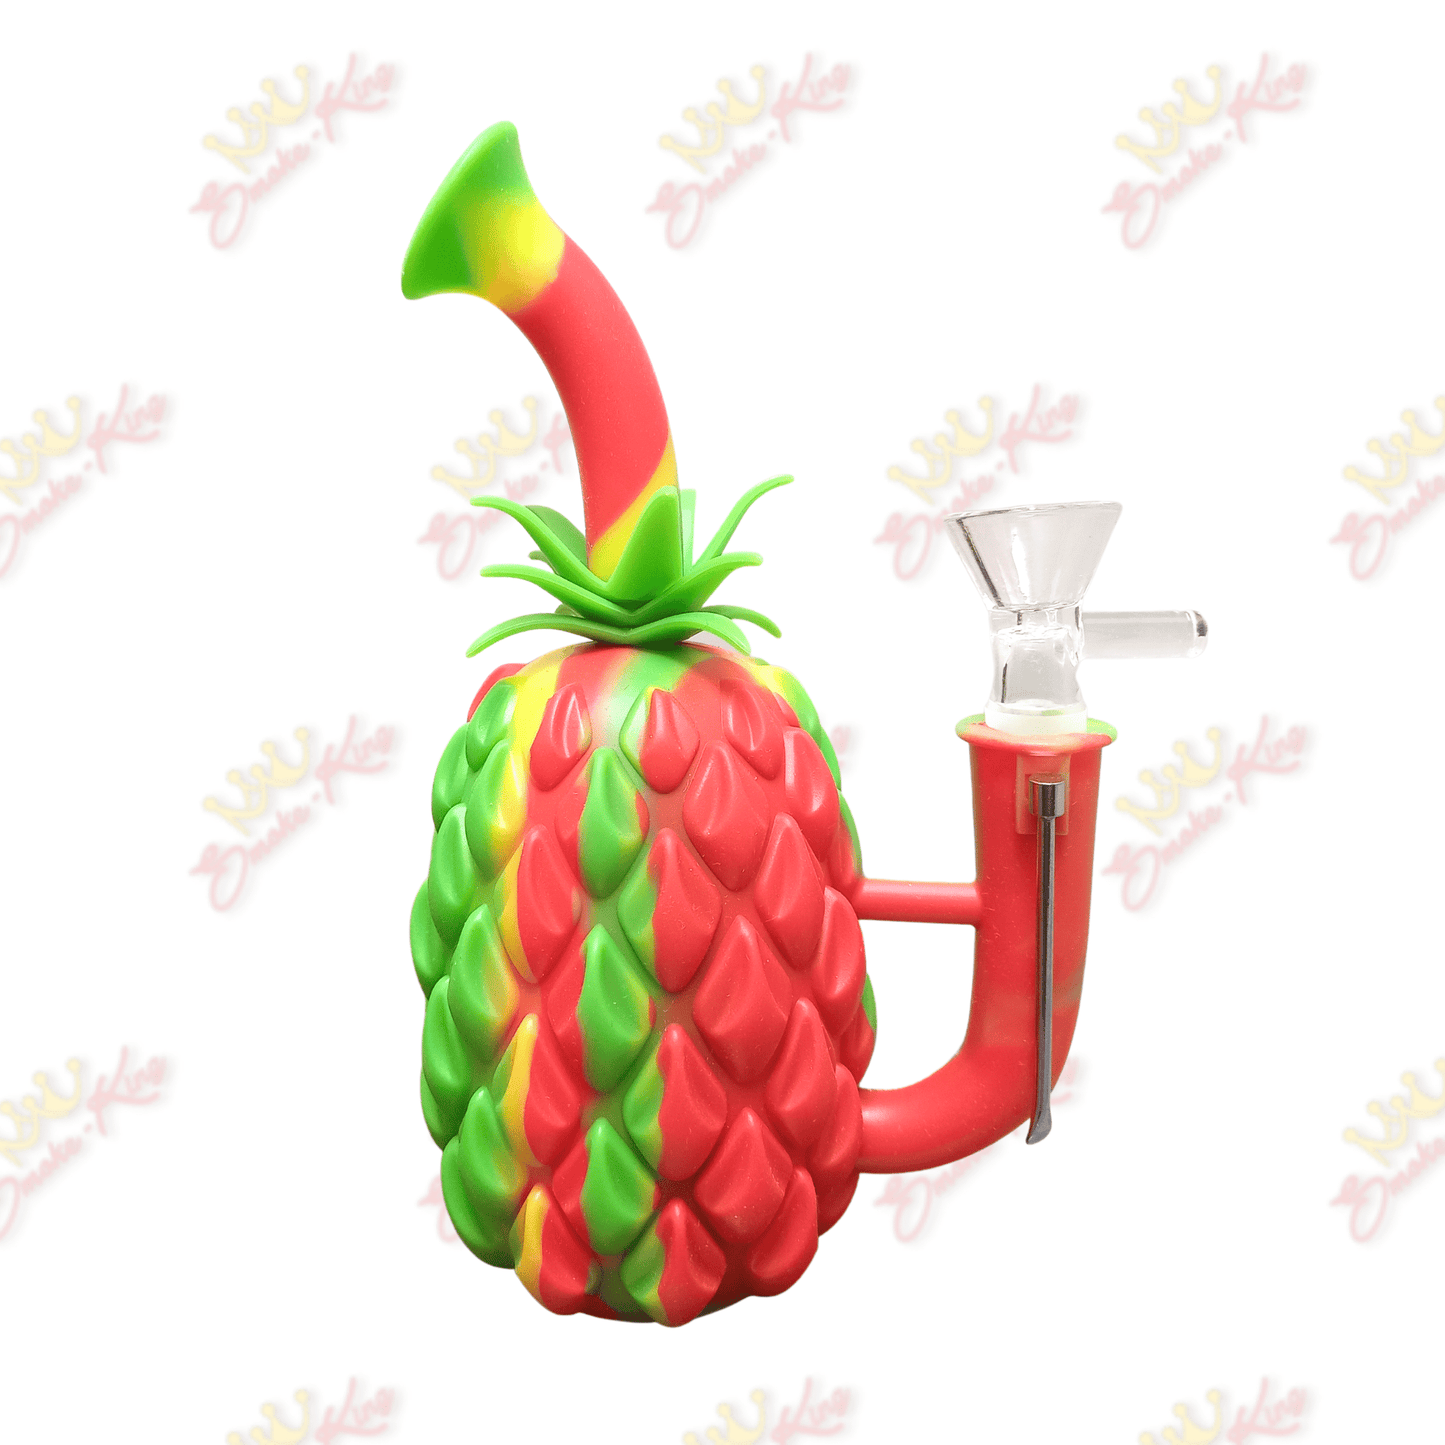 Silicone Pineapple Bong